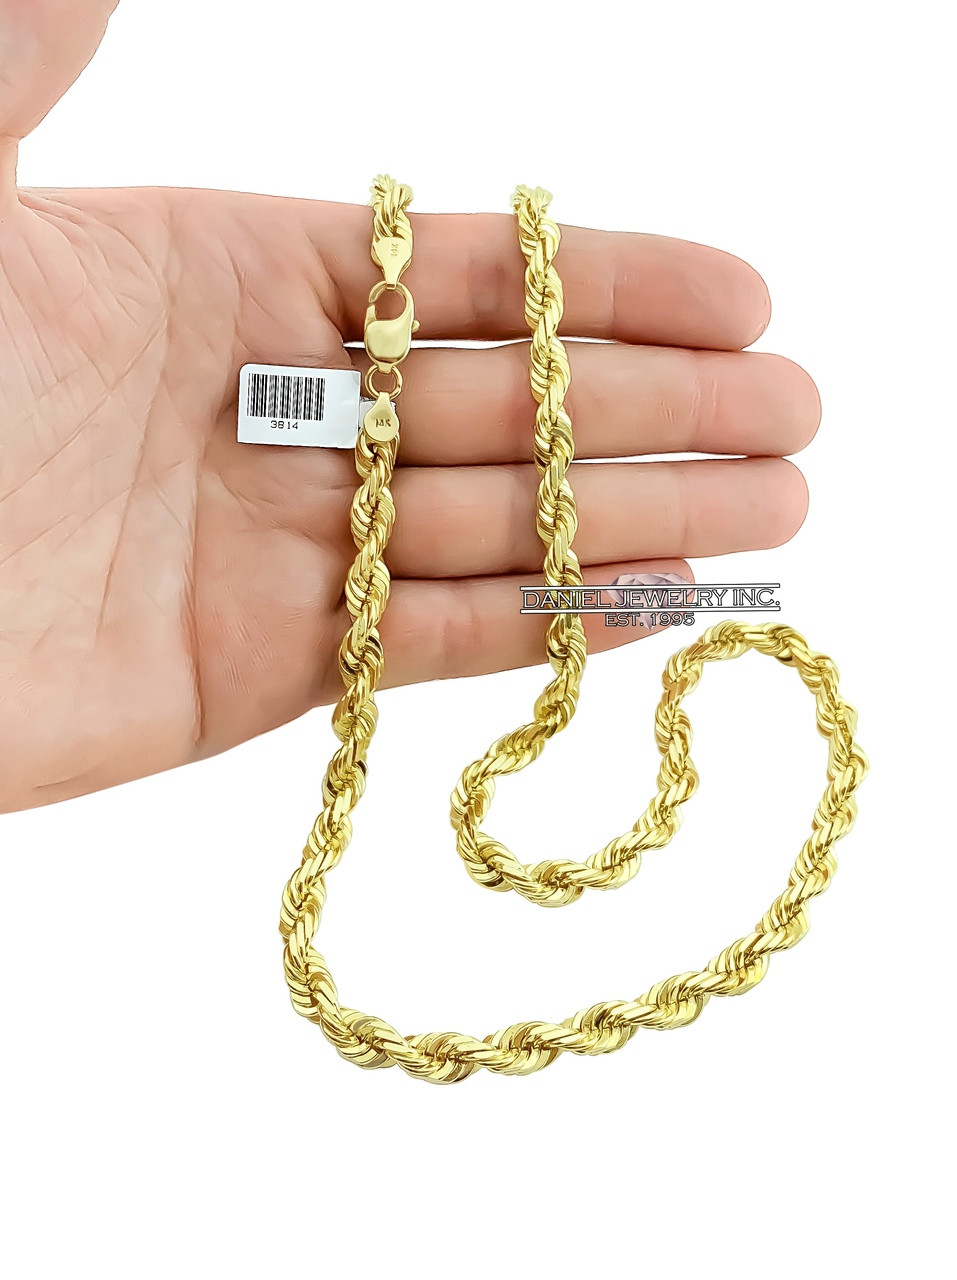 14 kt gold Mother and child abstract pendant on 14kt gold rope chain 20\u201d long 8 grms 4485